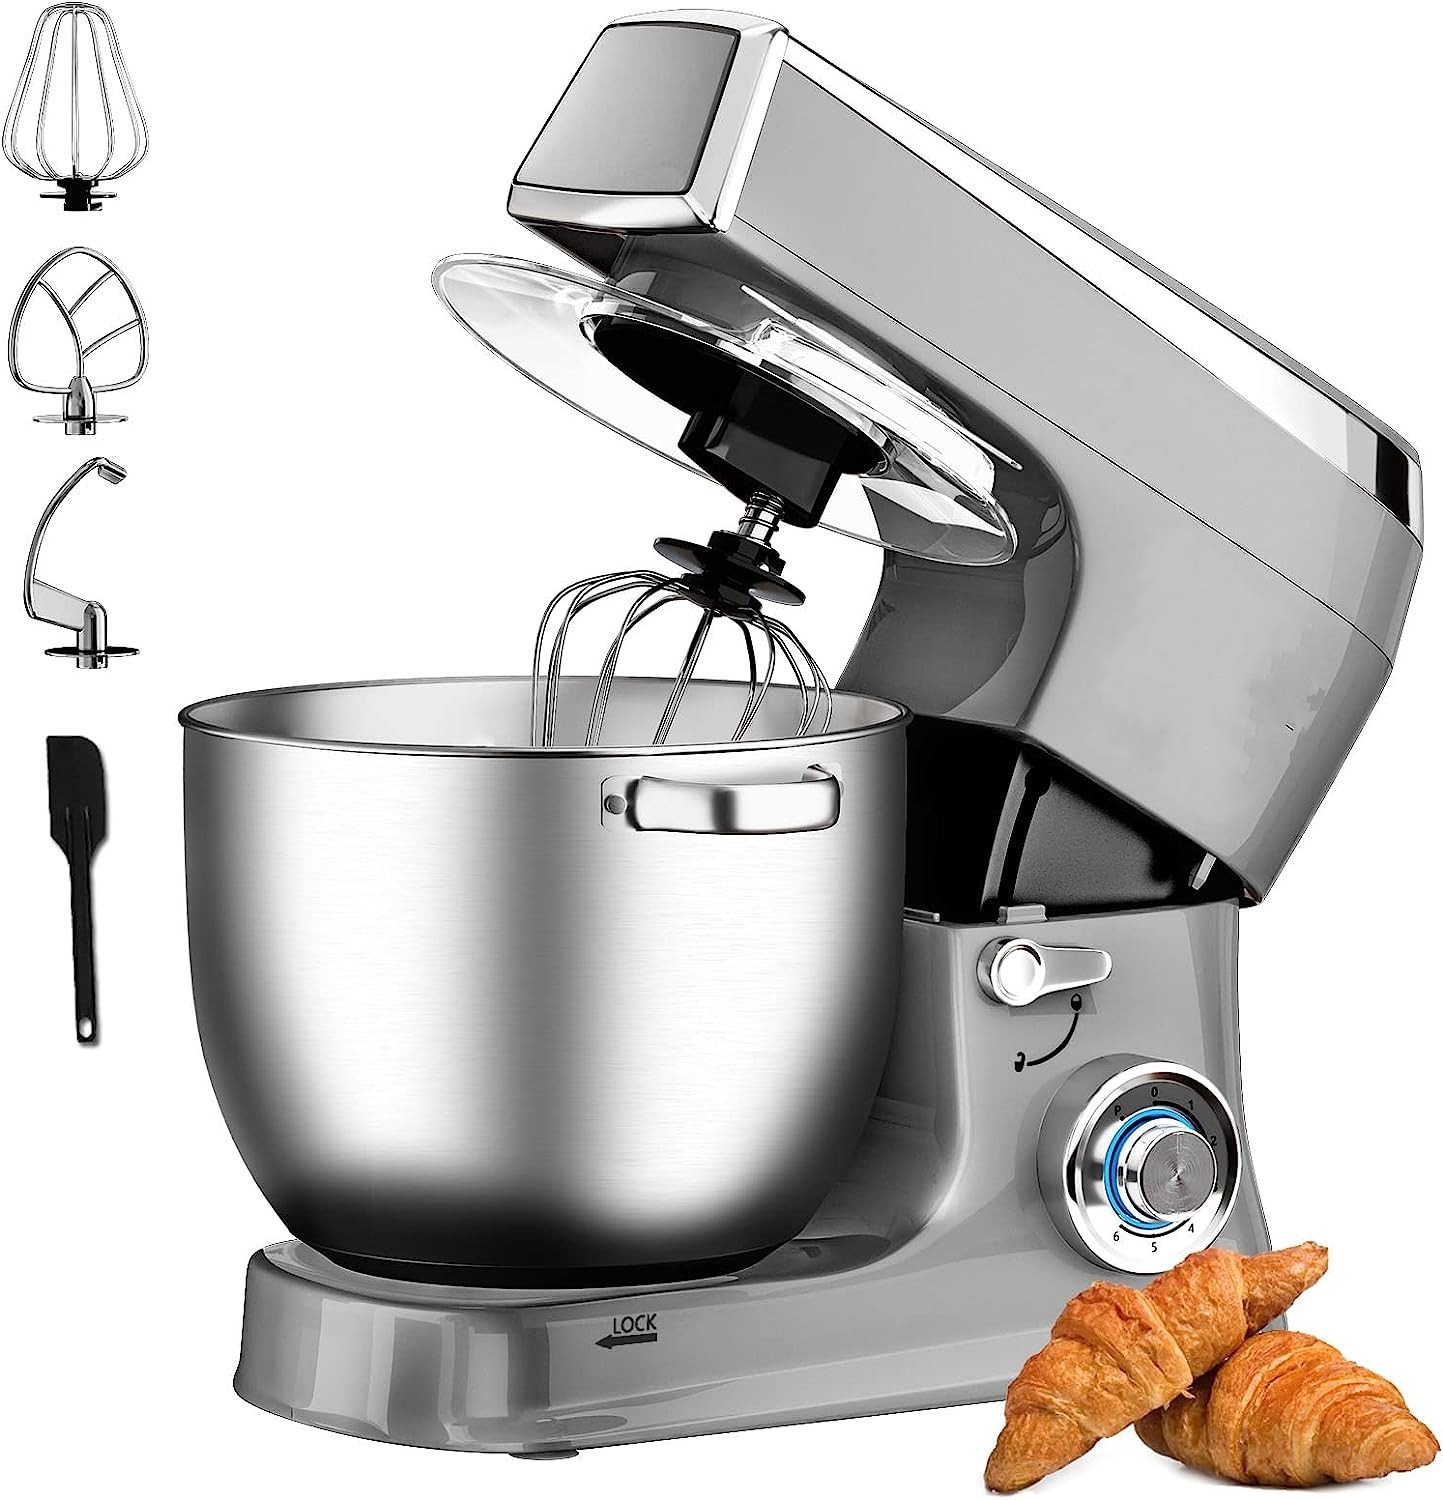 Planetary Mixer With Whisk, Dough Hook, Mixing Hook, Pan Scraper, With Splash Guard & Stainless Steel Mixing Bowl 7.5 L- 2100W - Silver - Royalty Line